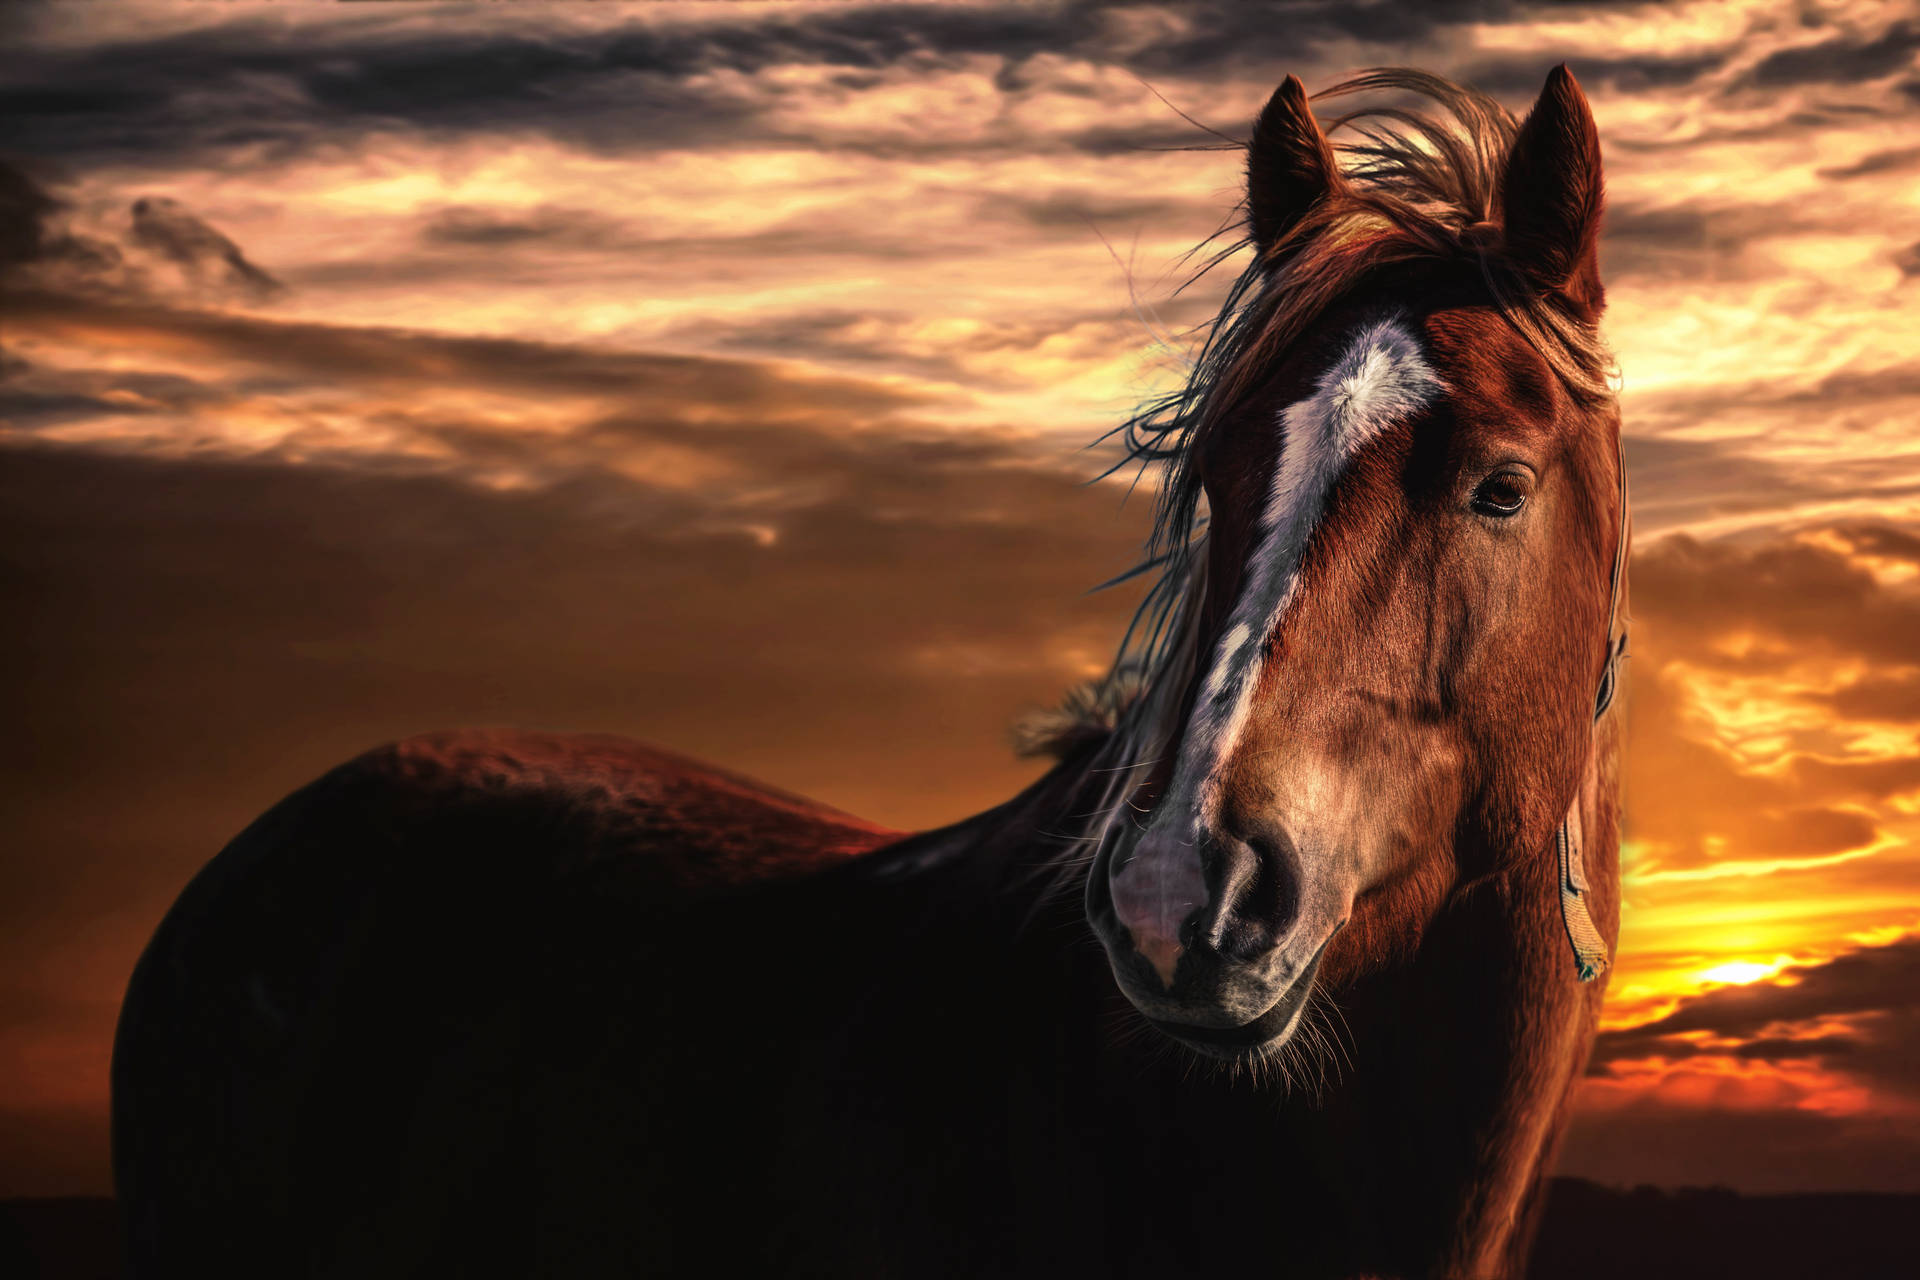 100+] Hd Horse Wallpapers for FREE 